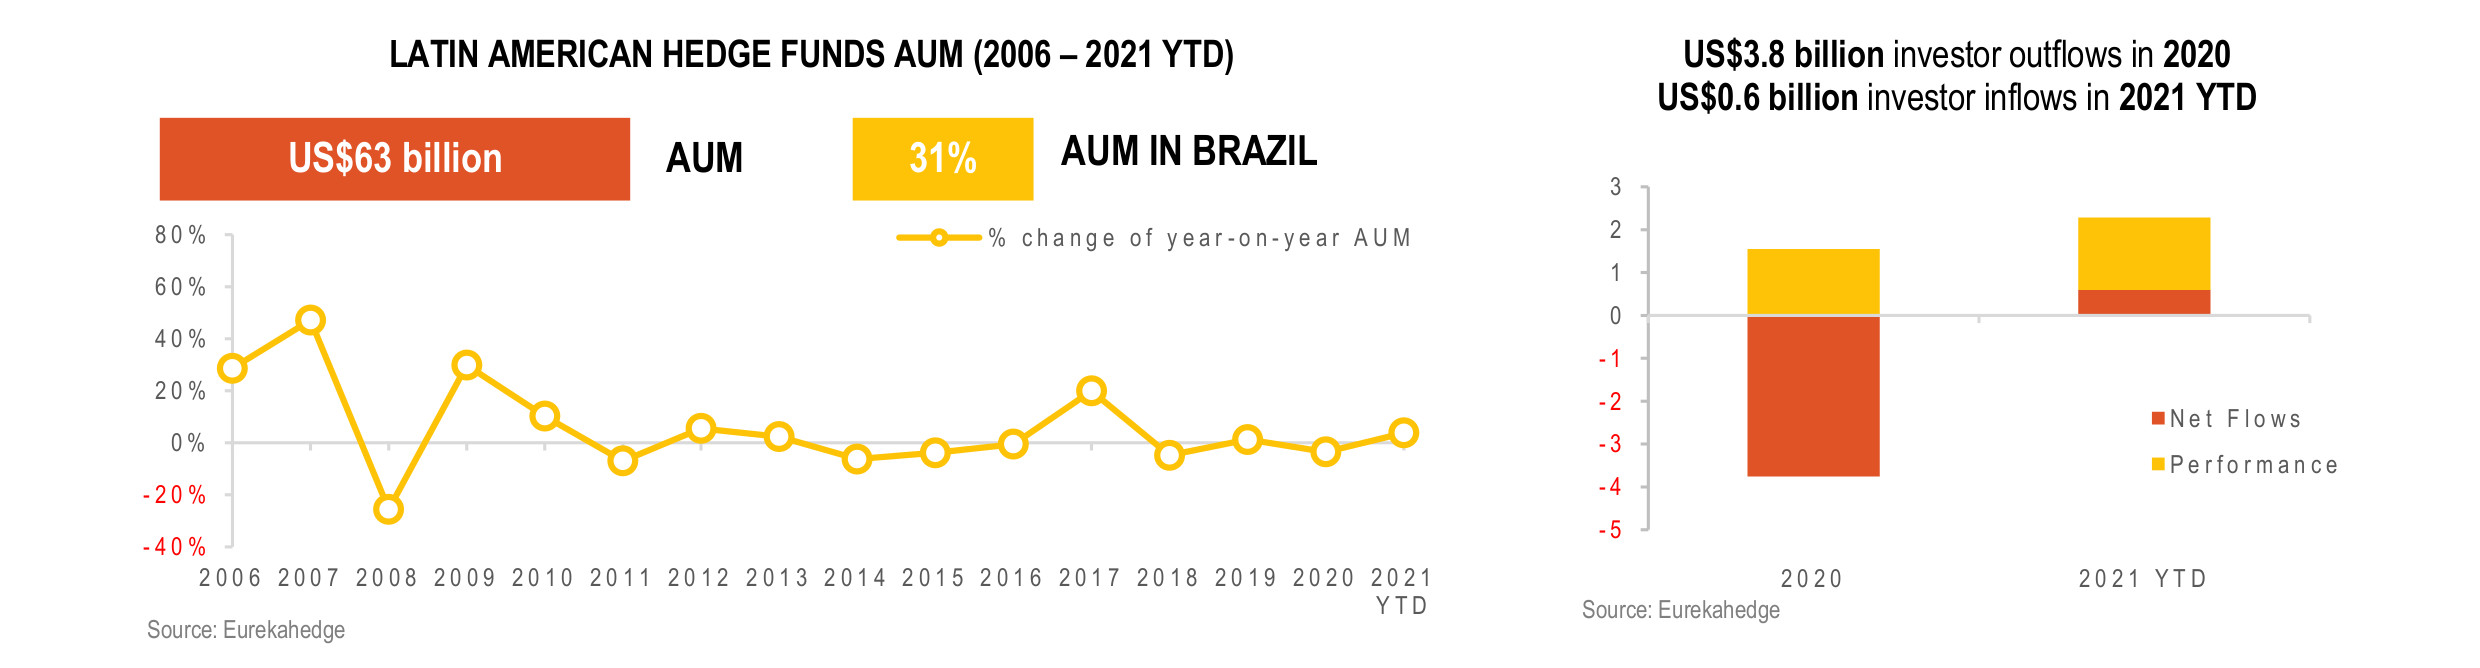 Latin American Hedge Funds Infographic Sep 2021 - AUM